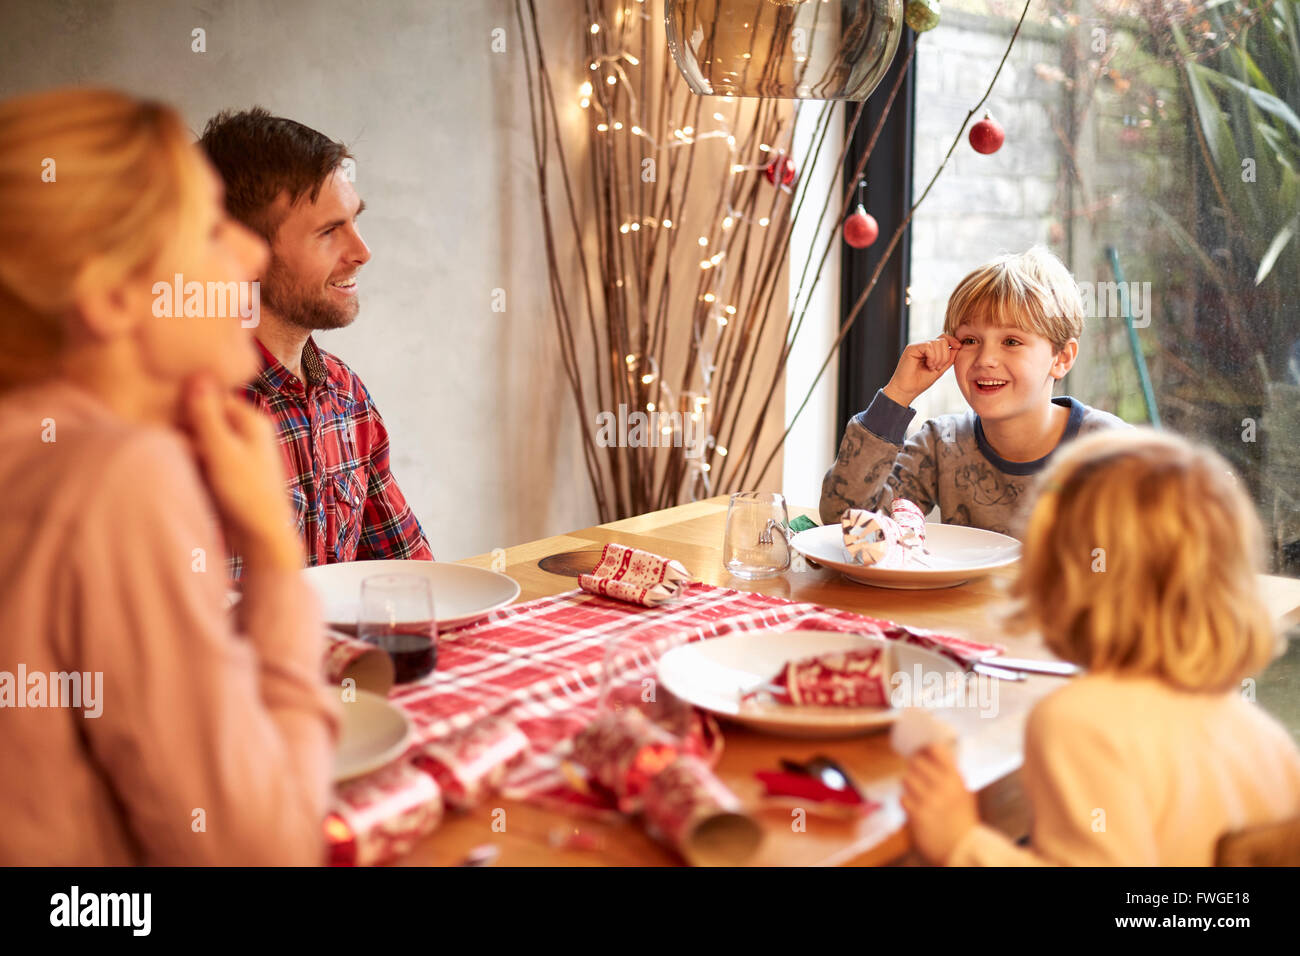 A family of four people, two adults and two children seated around  a table at Christmas time, pulling crackers. Stock Photo